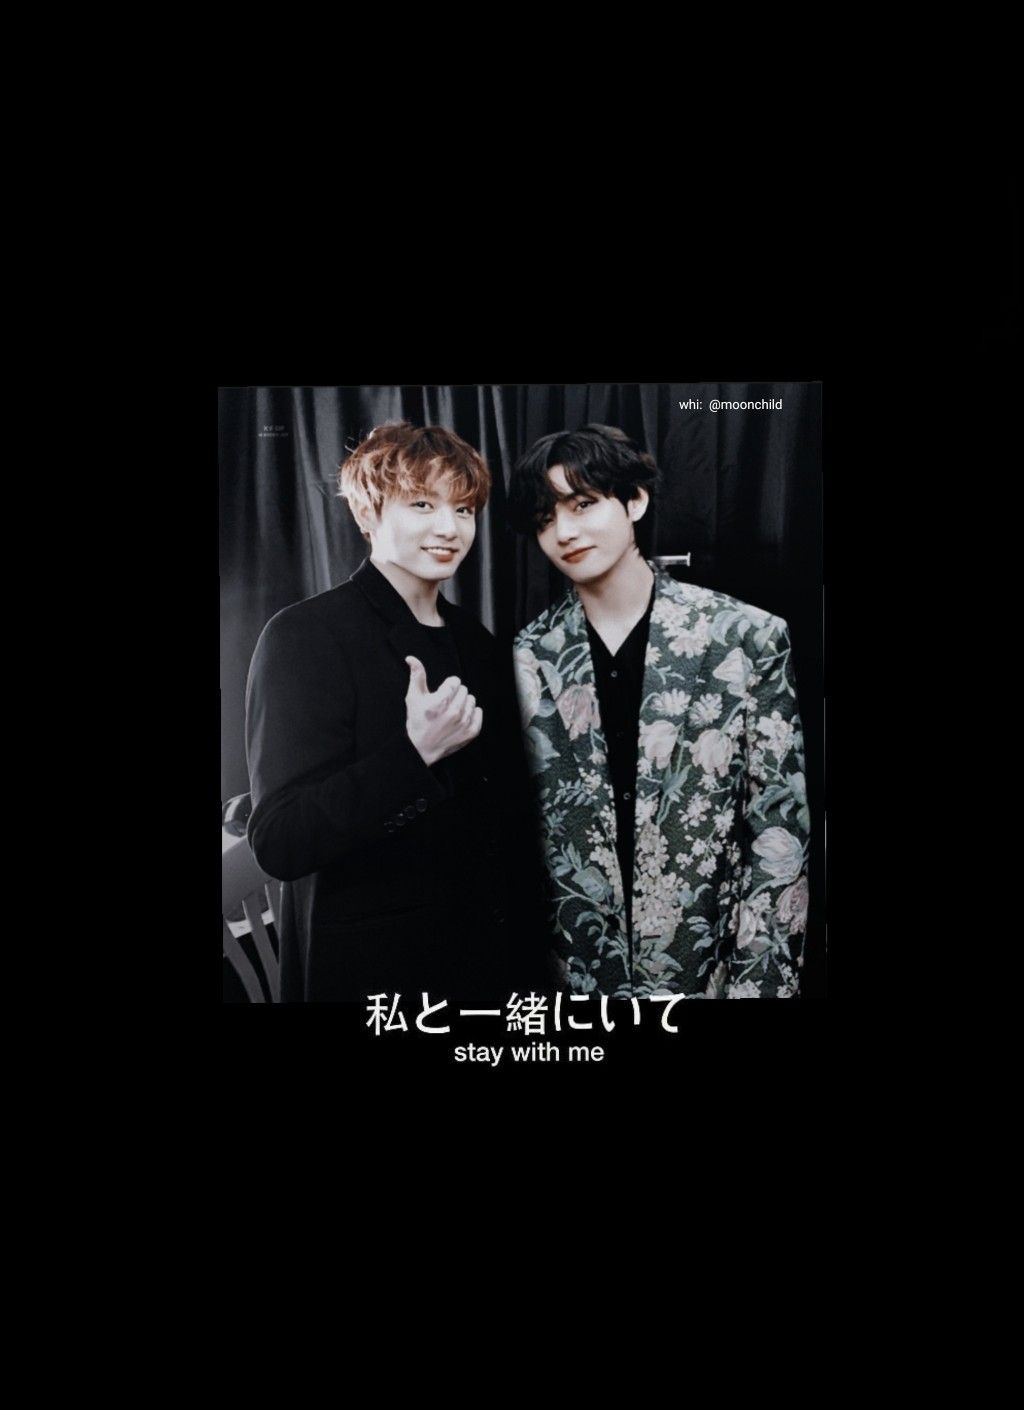 Vkook Wallpaper Pack 2 3 Made By Me Please Don't Remove The Watermark